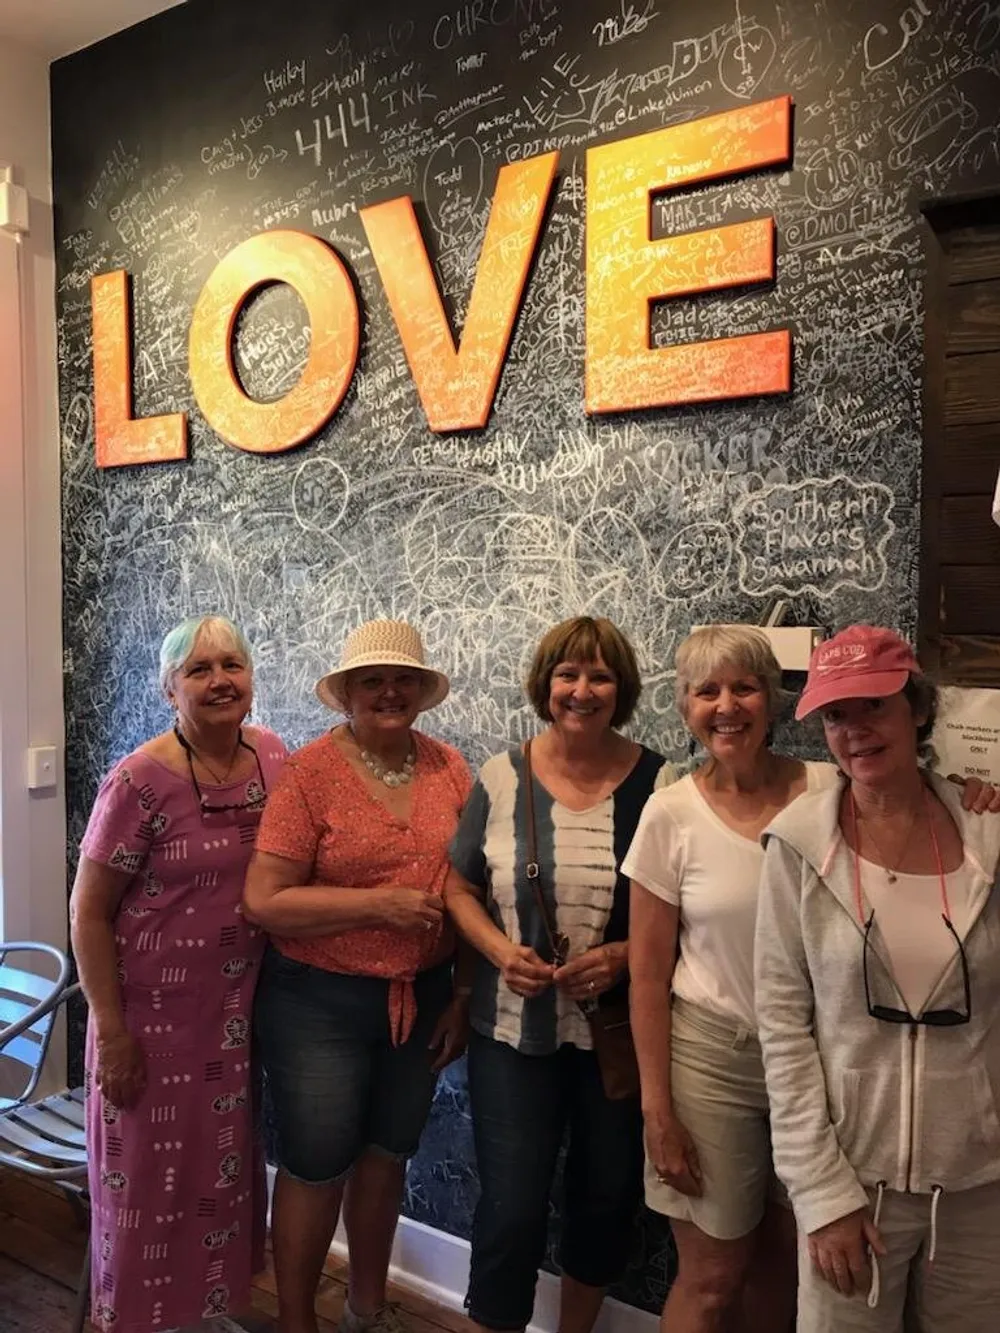 Five smiling women stand in front of a wall with a large illuminated LOVE sign which is covered in handwritten signatures and messages